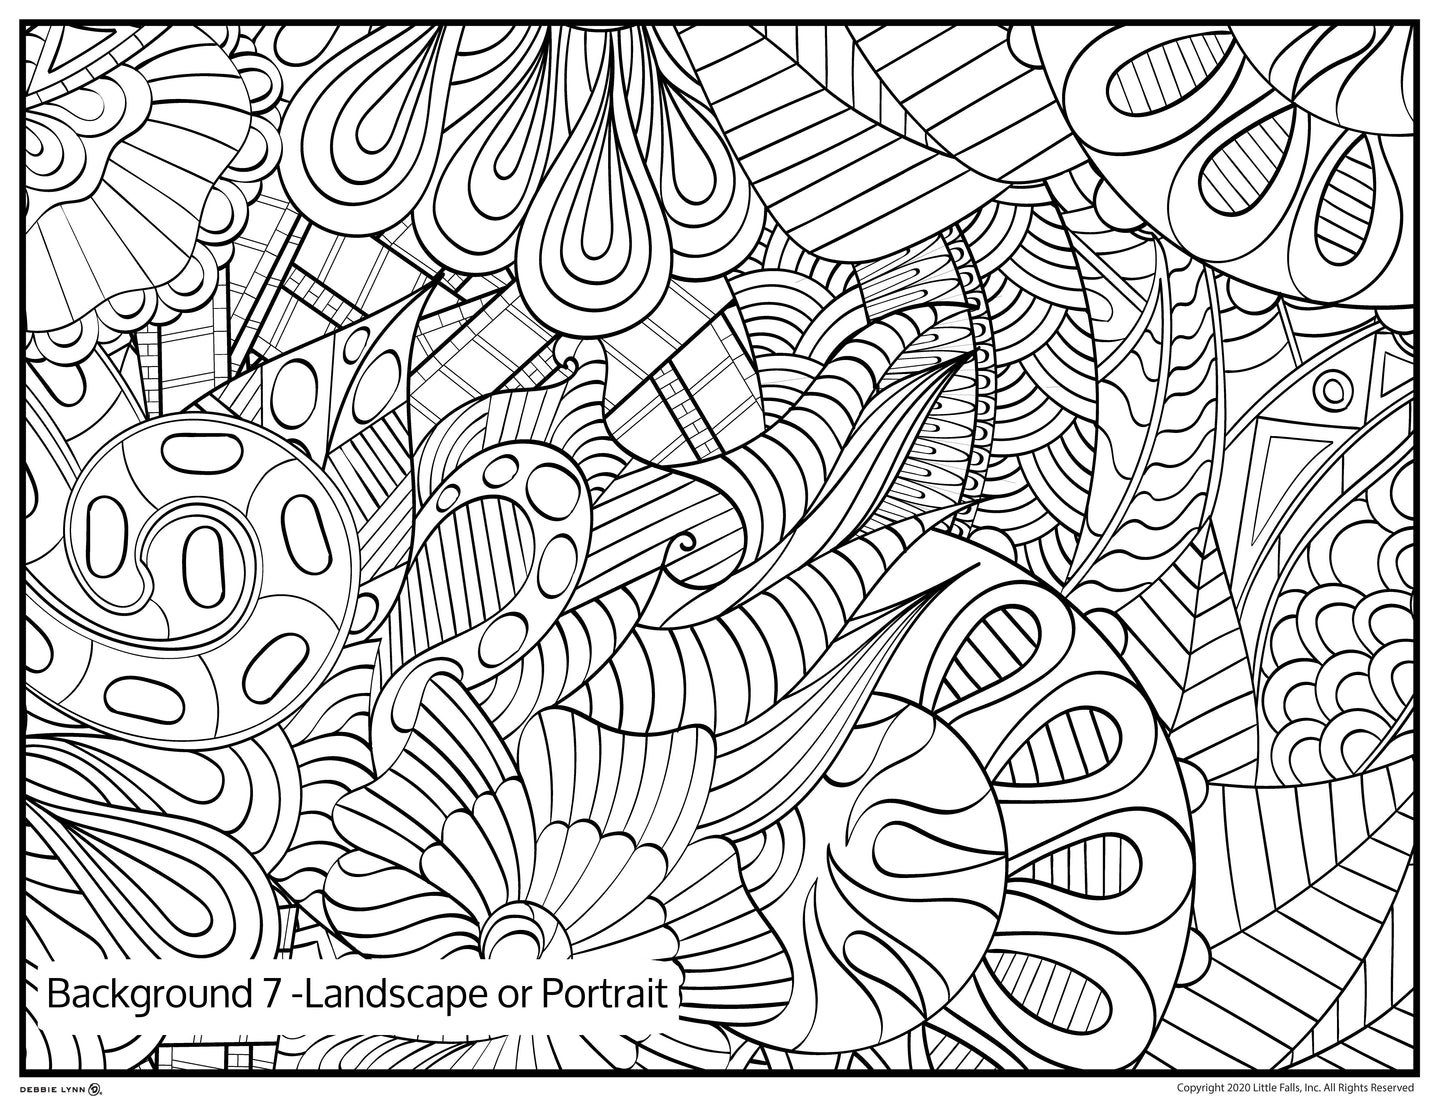 Background 7 Custom Personalized Giant Coloring Poster 46"x60"